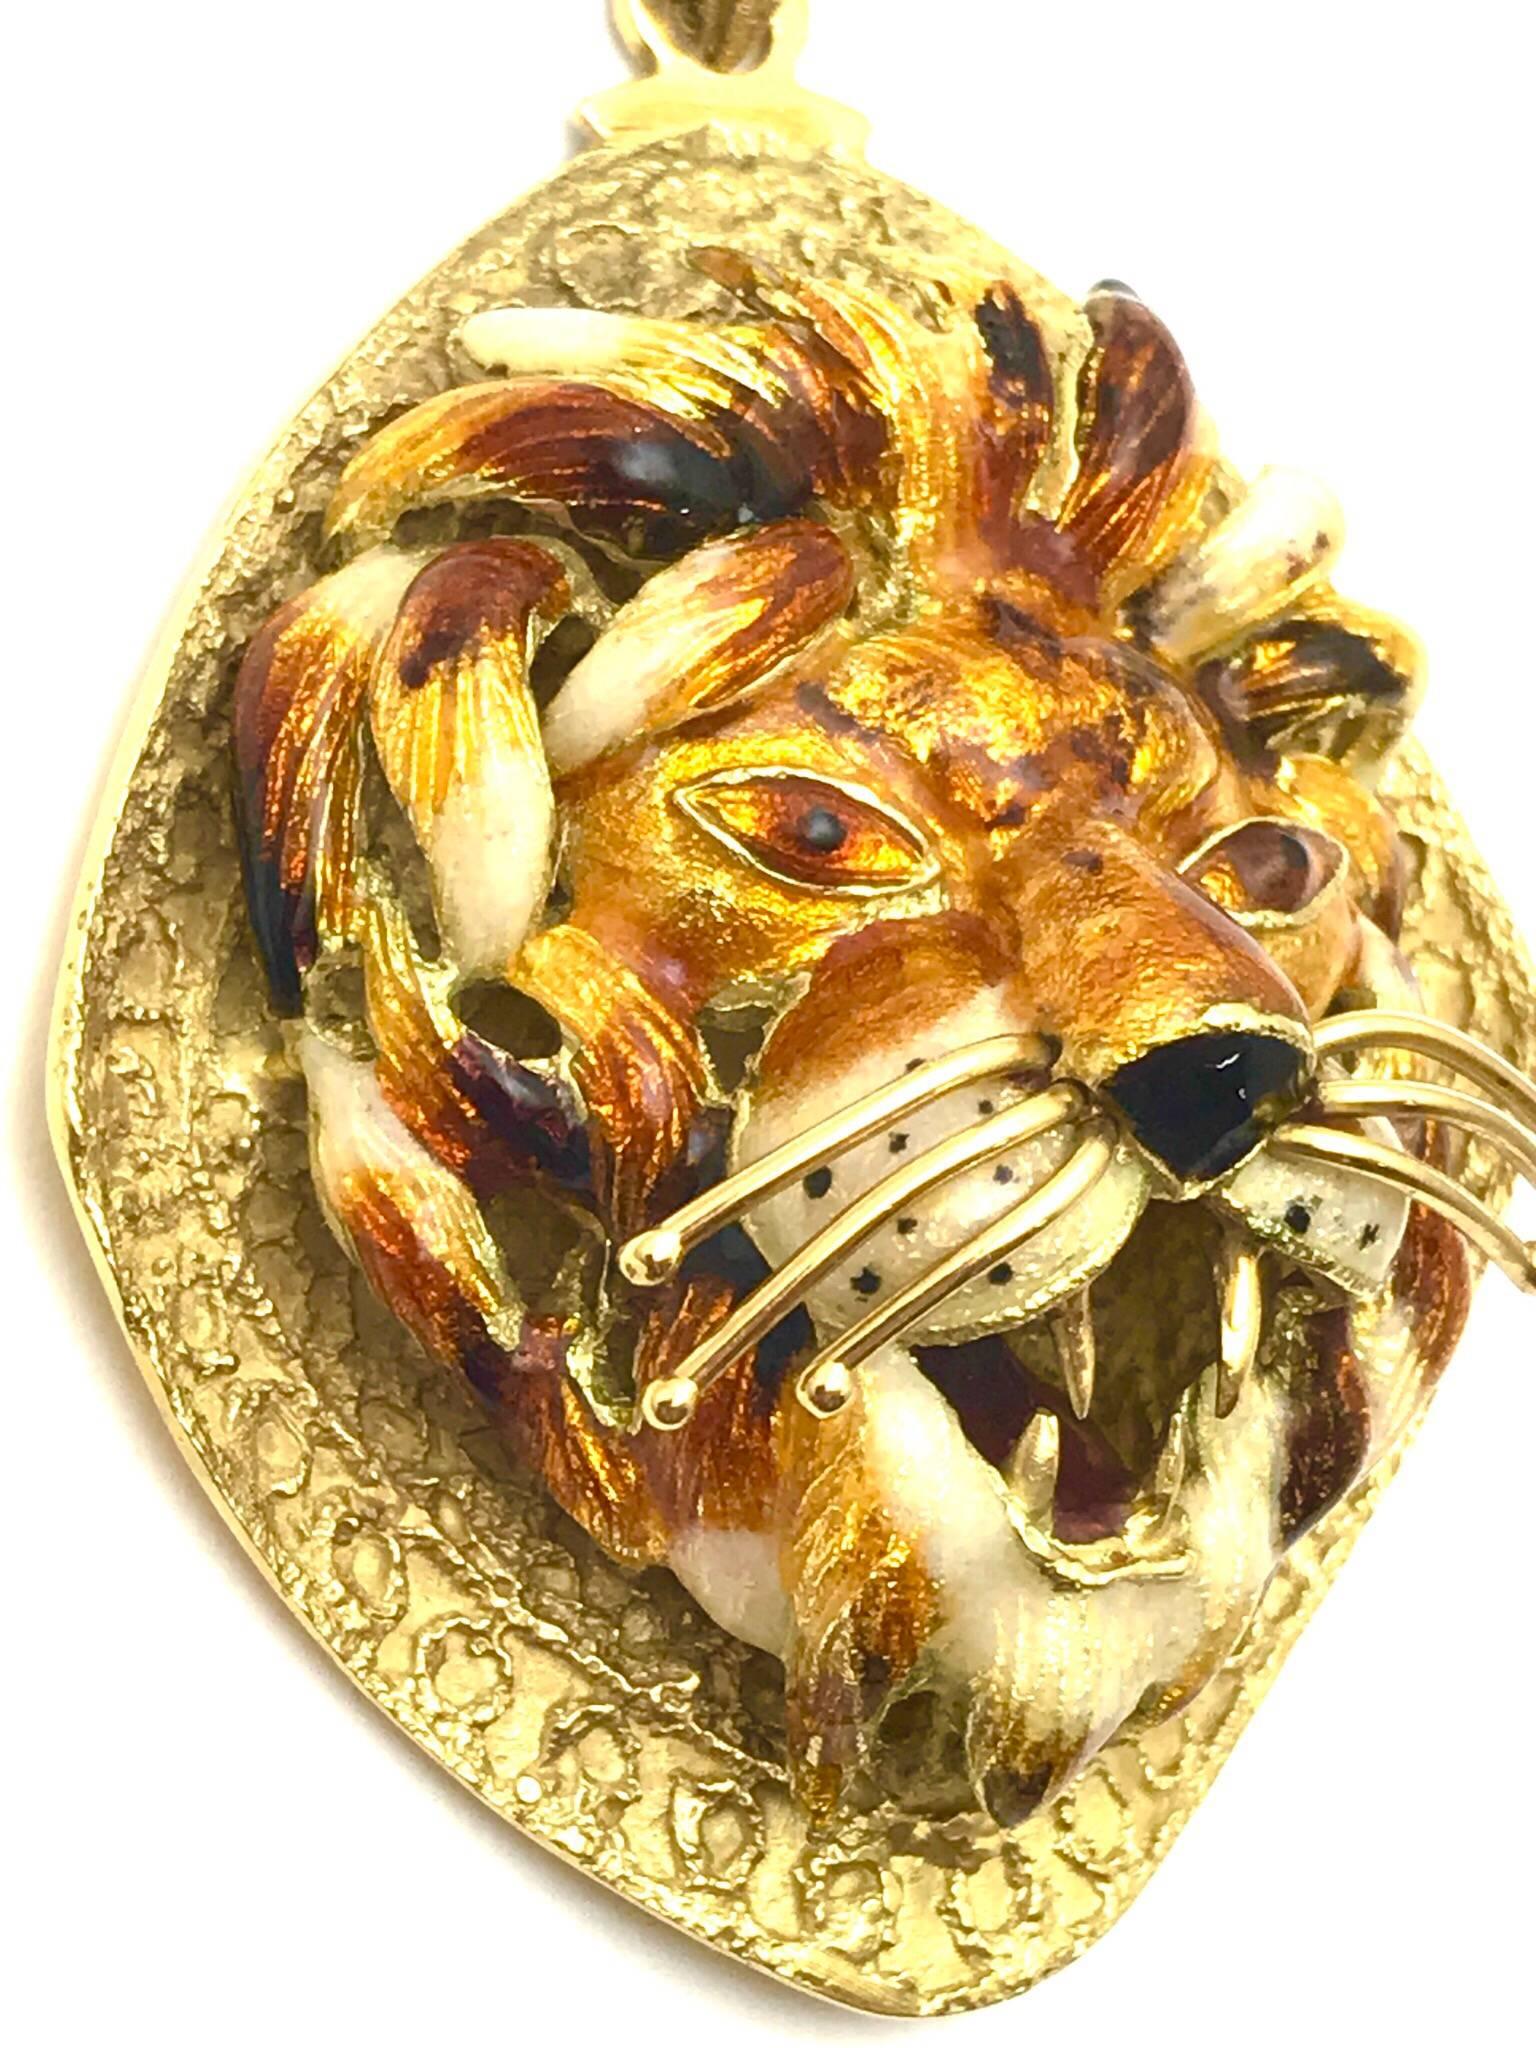 18kt yellow gold enamel lion has been designed with varying shades of reds, orange, yellow and white enamel. Italian in origin, the fine workmanship is indicative of a specialized talent and craftsmanship. The lions eyes has been are black and